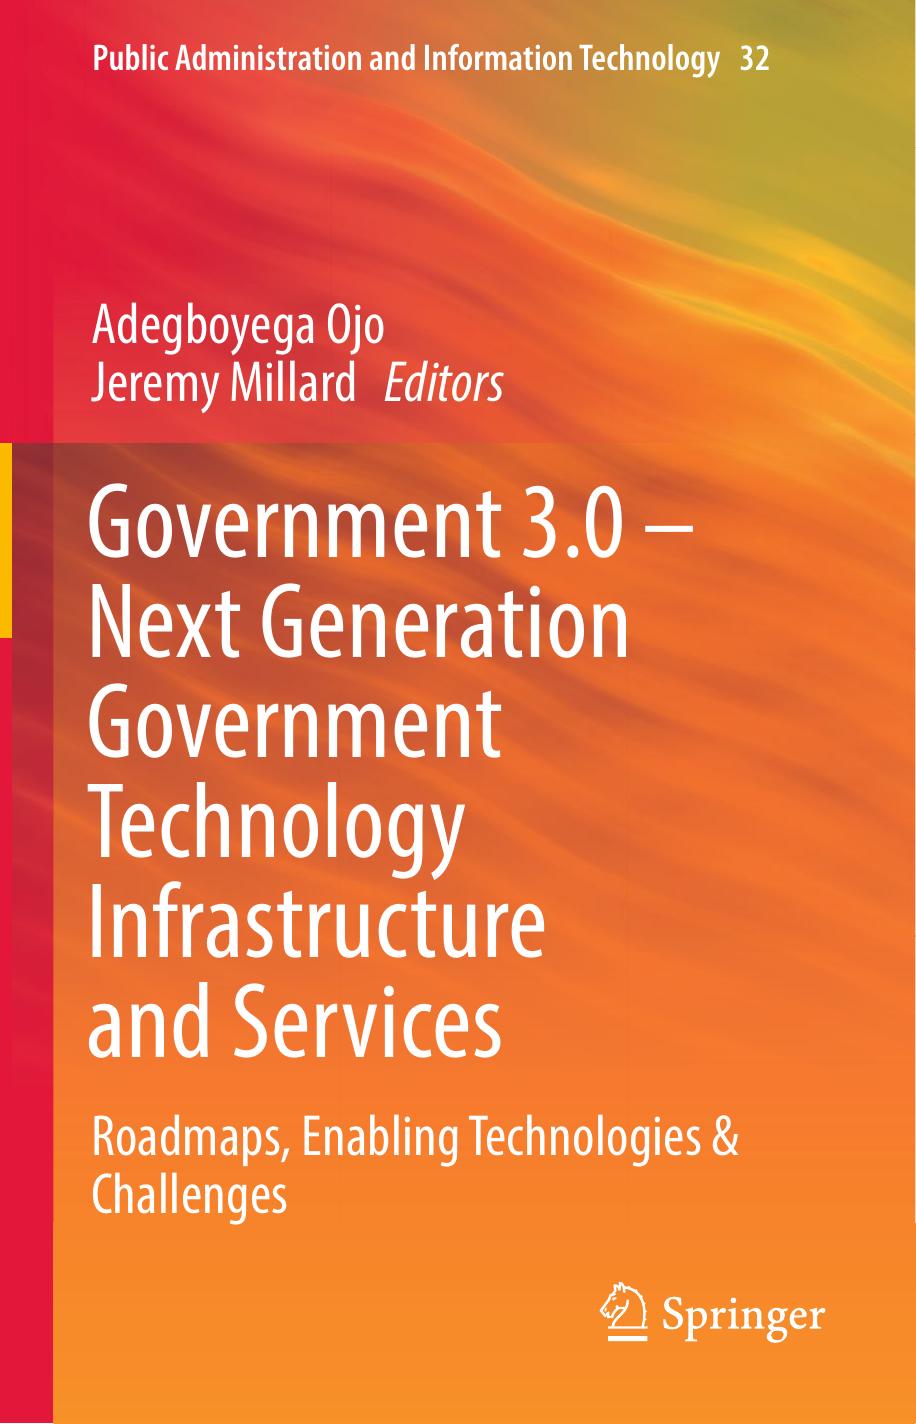 Next Generation Government Technology Infrastructure and Services  Roadmaps, Enabling Technologies and statistics 2017